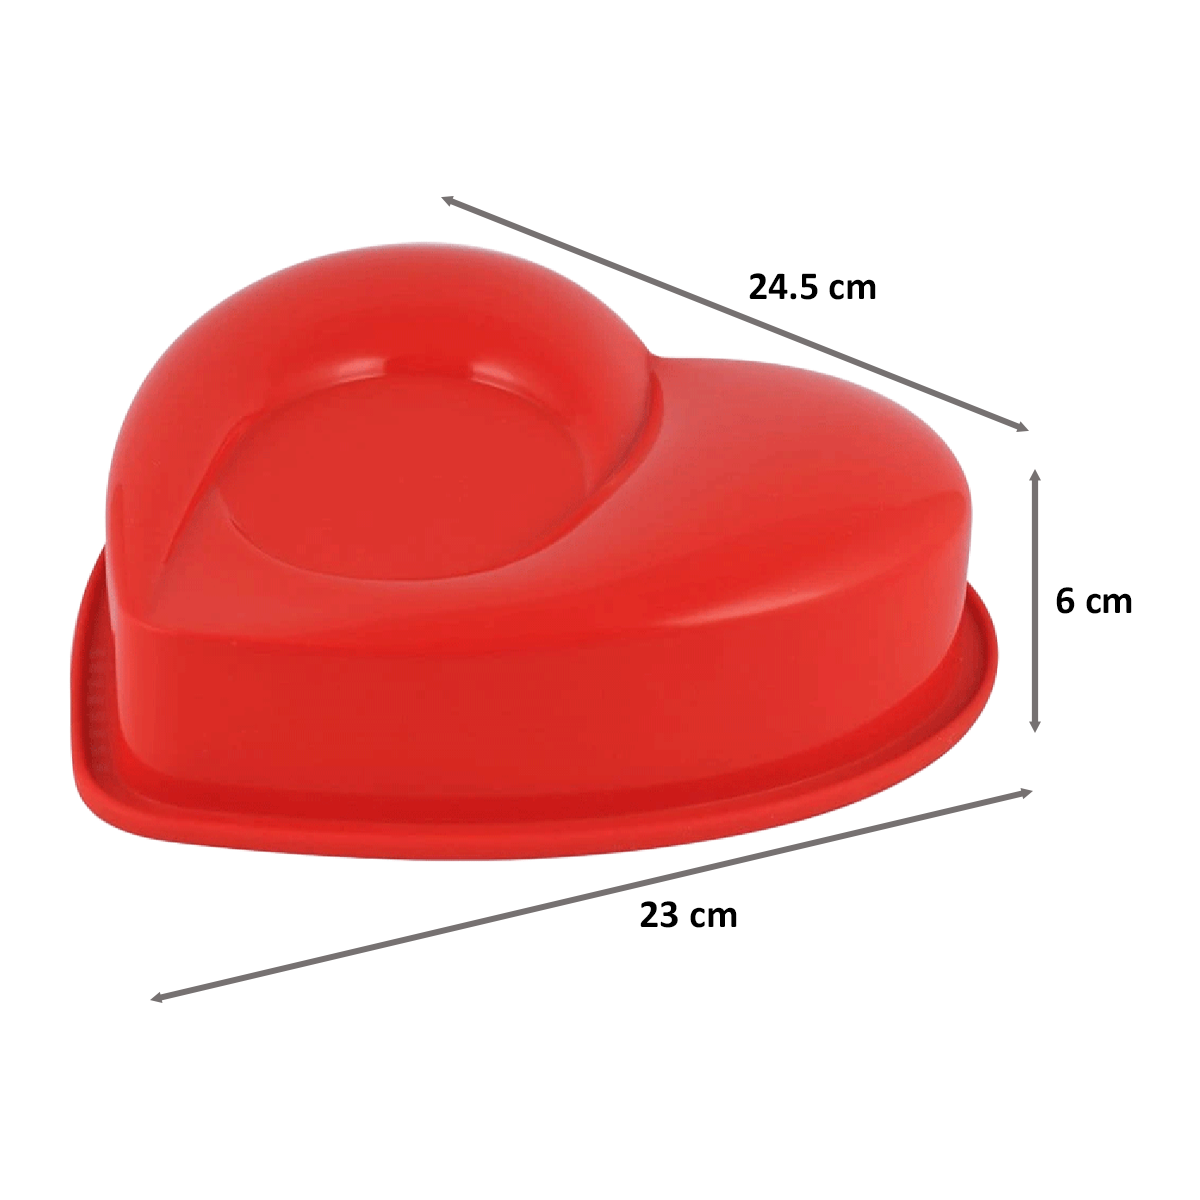 Wonderchef Pavoni Heart Shaped Cake Mould (Non-Toxic, 63152920, Red)_2